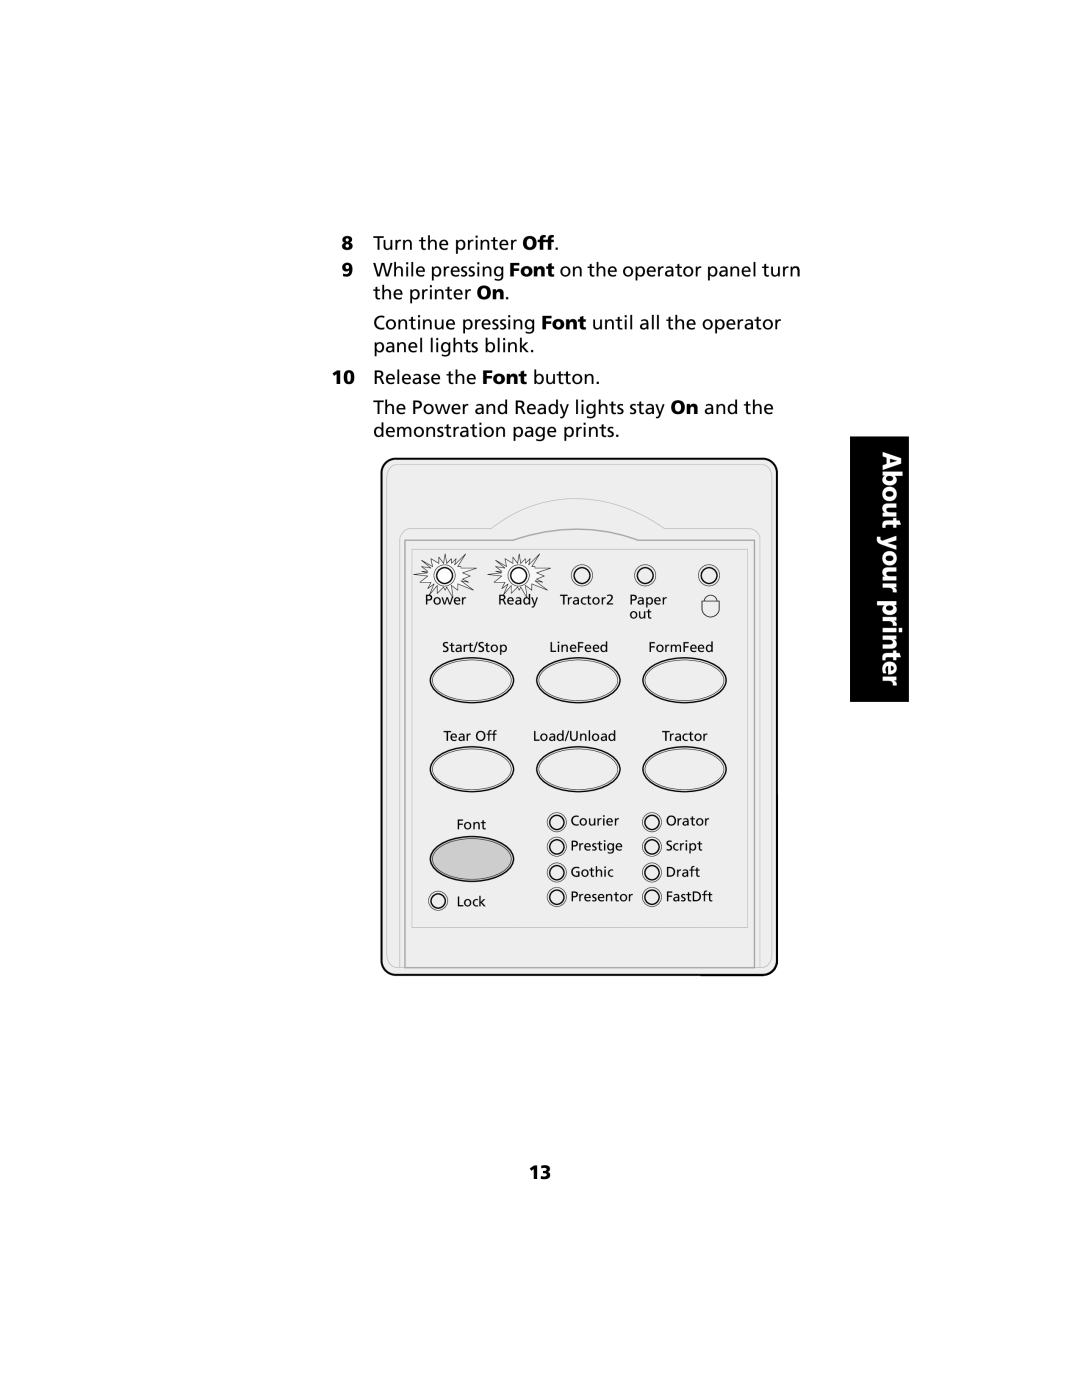 Lexmark 2480 manual About your printer, Turn the printer Off 